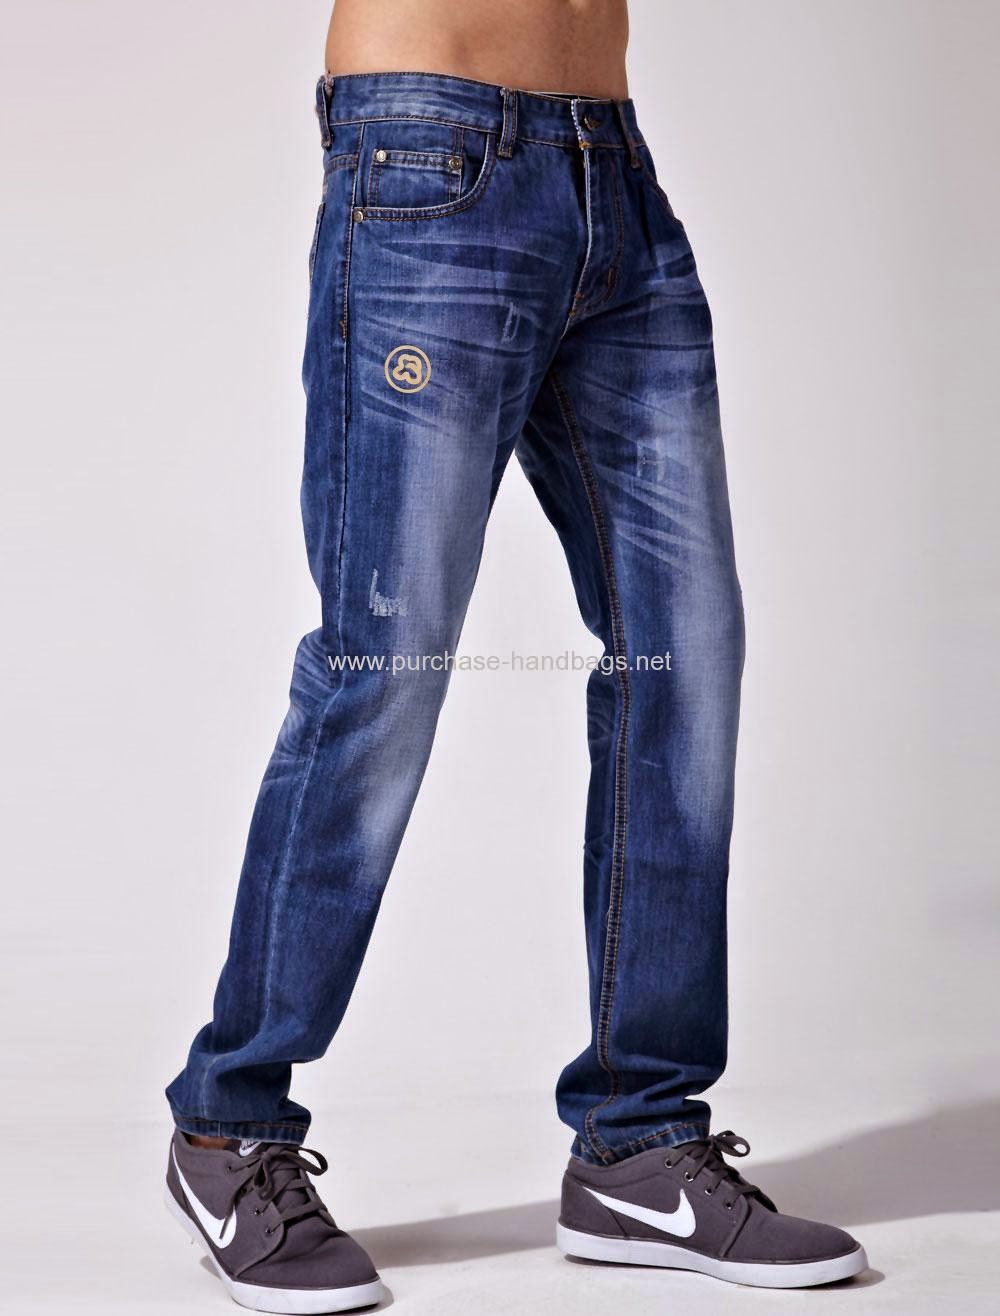 Gallery For Cool Jeans For Men 2013 | Fashion's Feel | Tips and Body Care